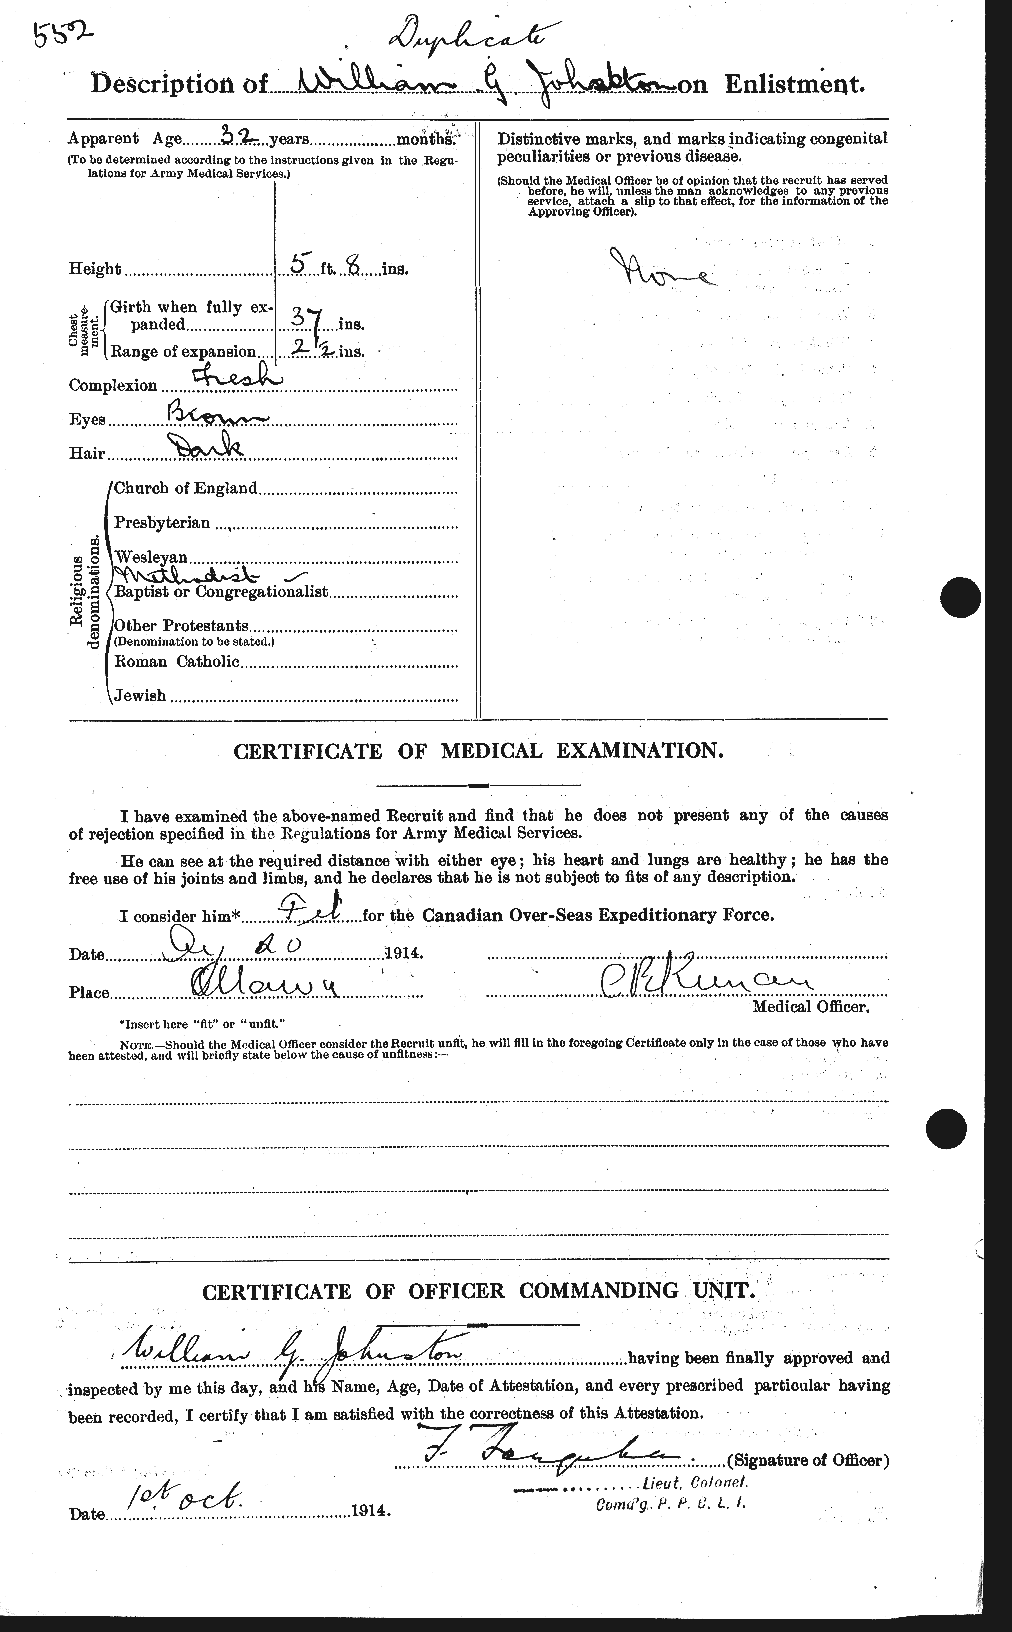 Personnel Records of the First World War - CEF 427327b